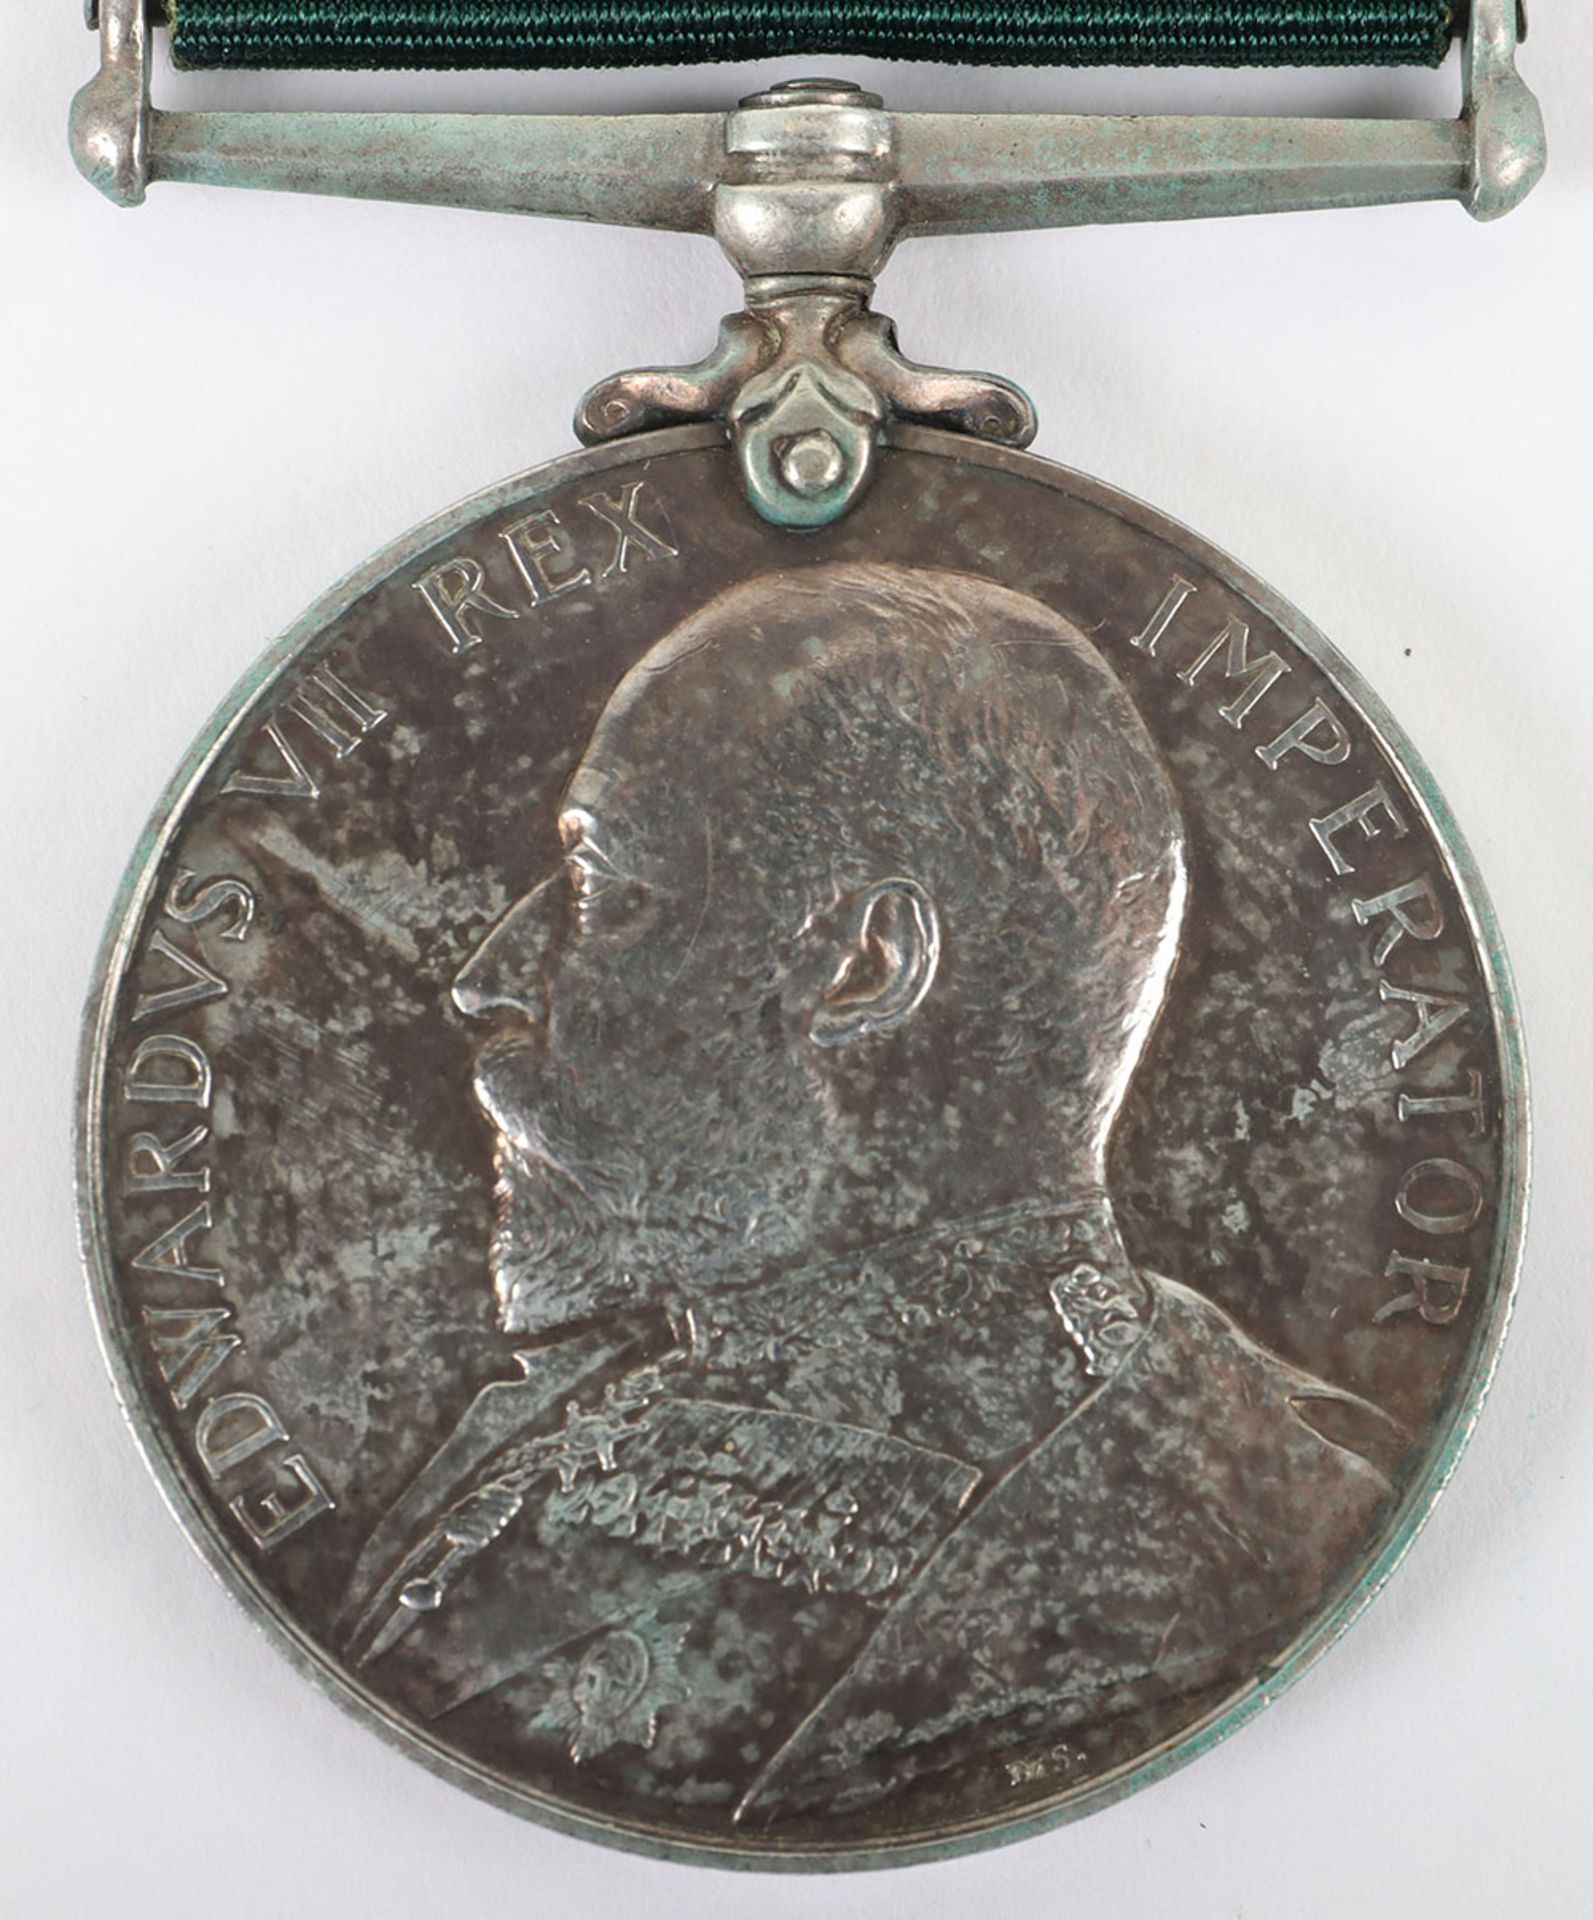 Edwardian Volunteer Long Service Medal to a Bugler in the 2nd Middlesex Volunteer Rifle Company - Image 2 of 5